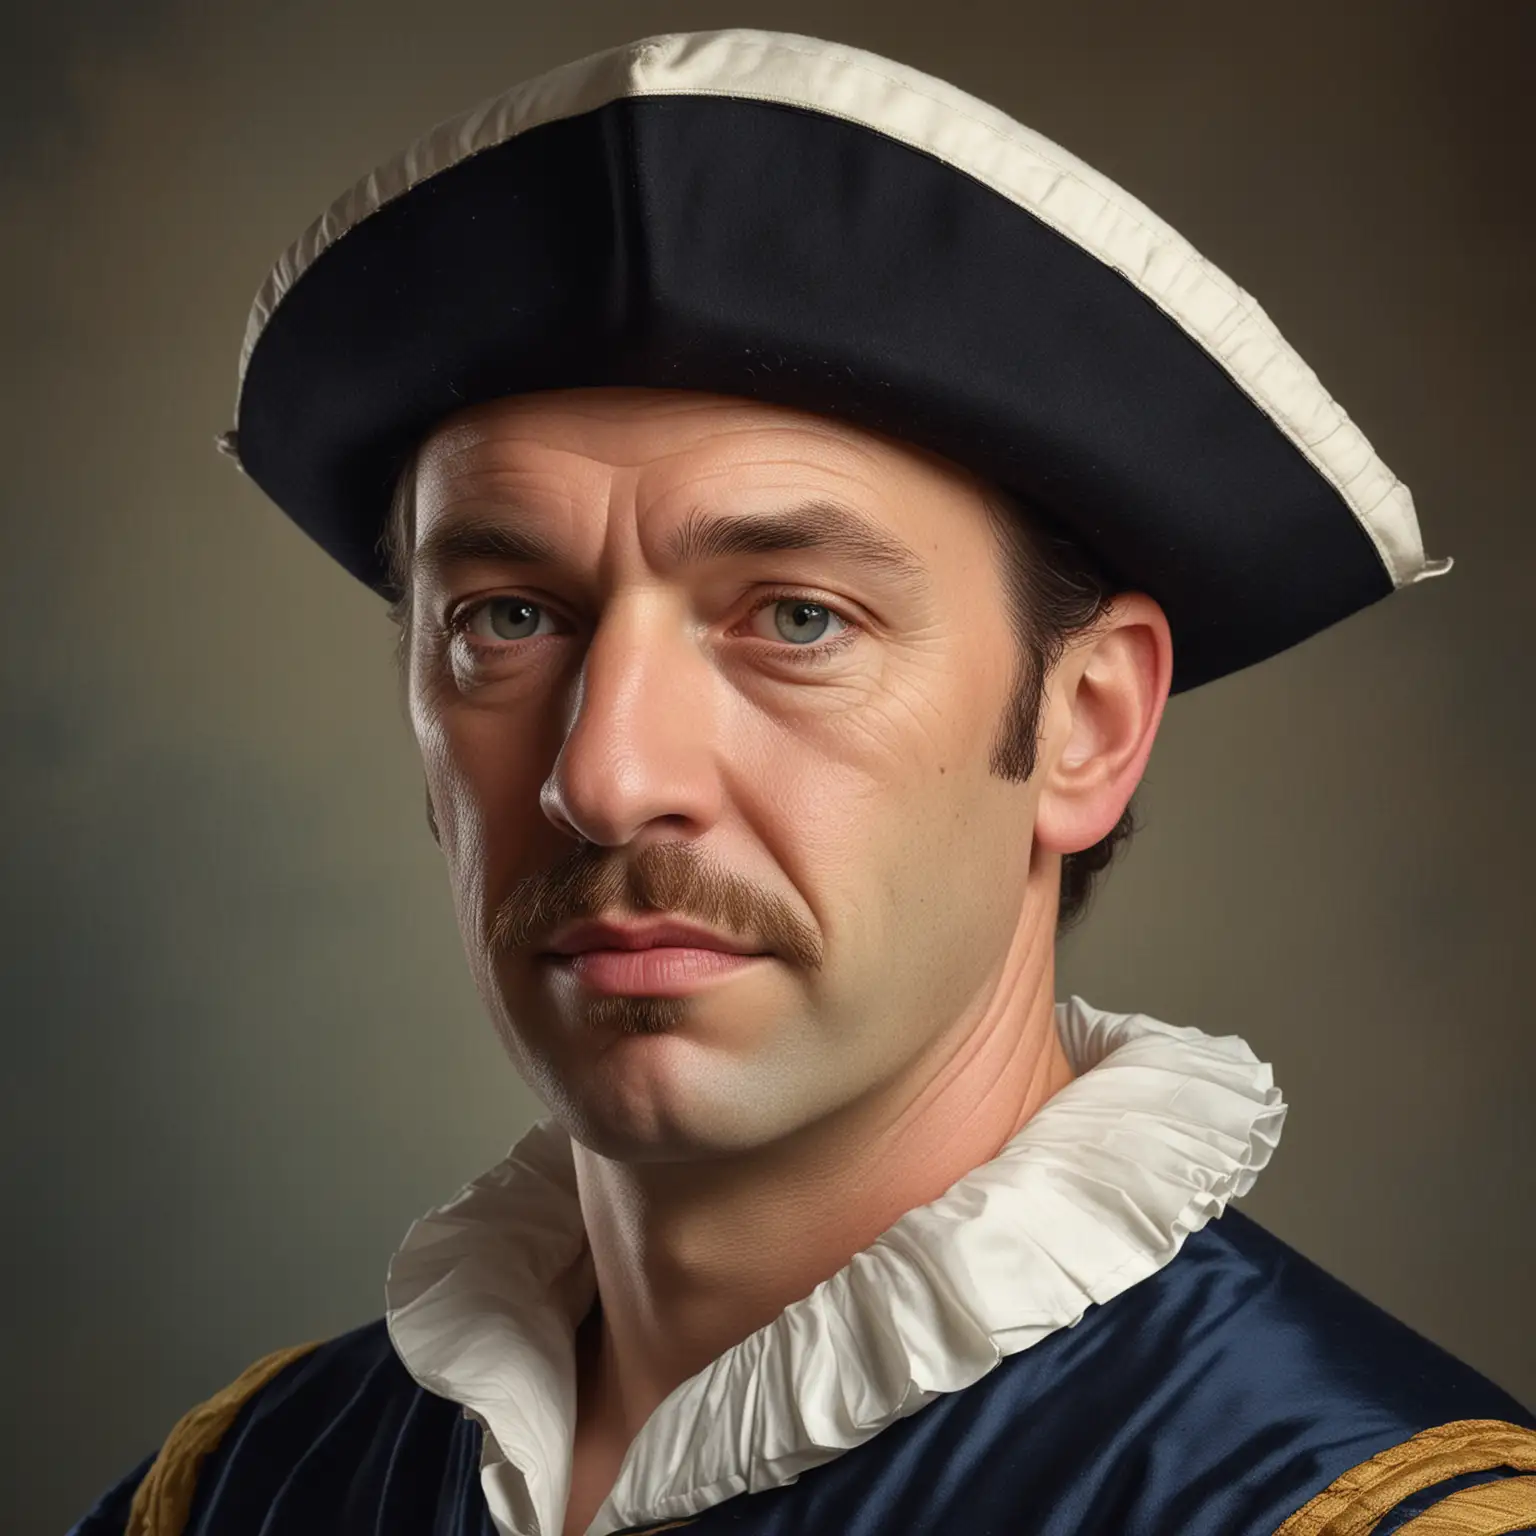 make a close-up 3/4 portrait of a 17th century middle aged characteristic captain sailor in Vermeer style